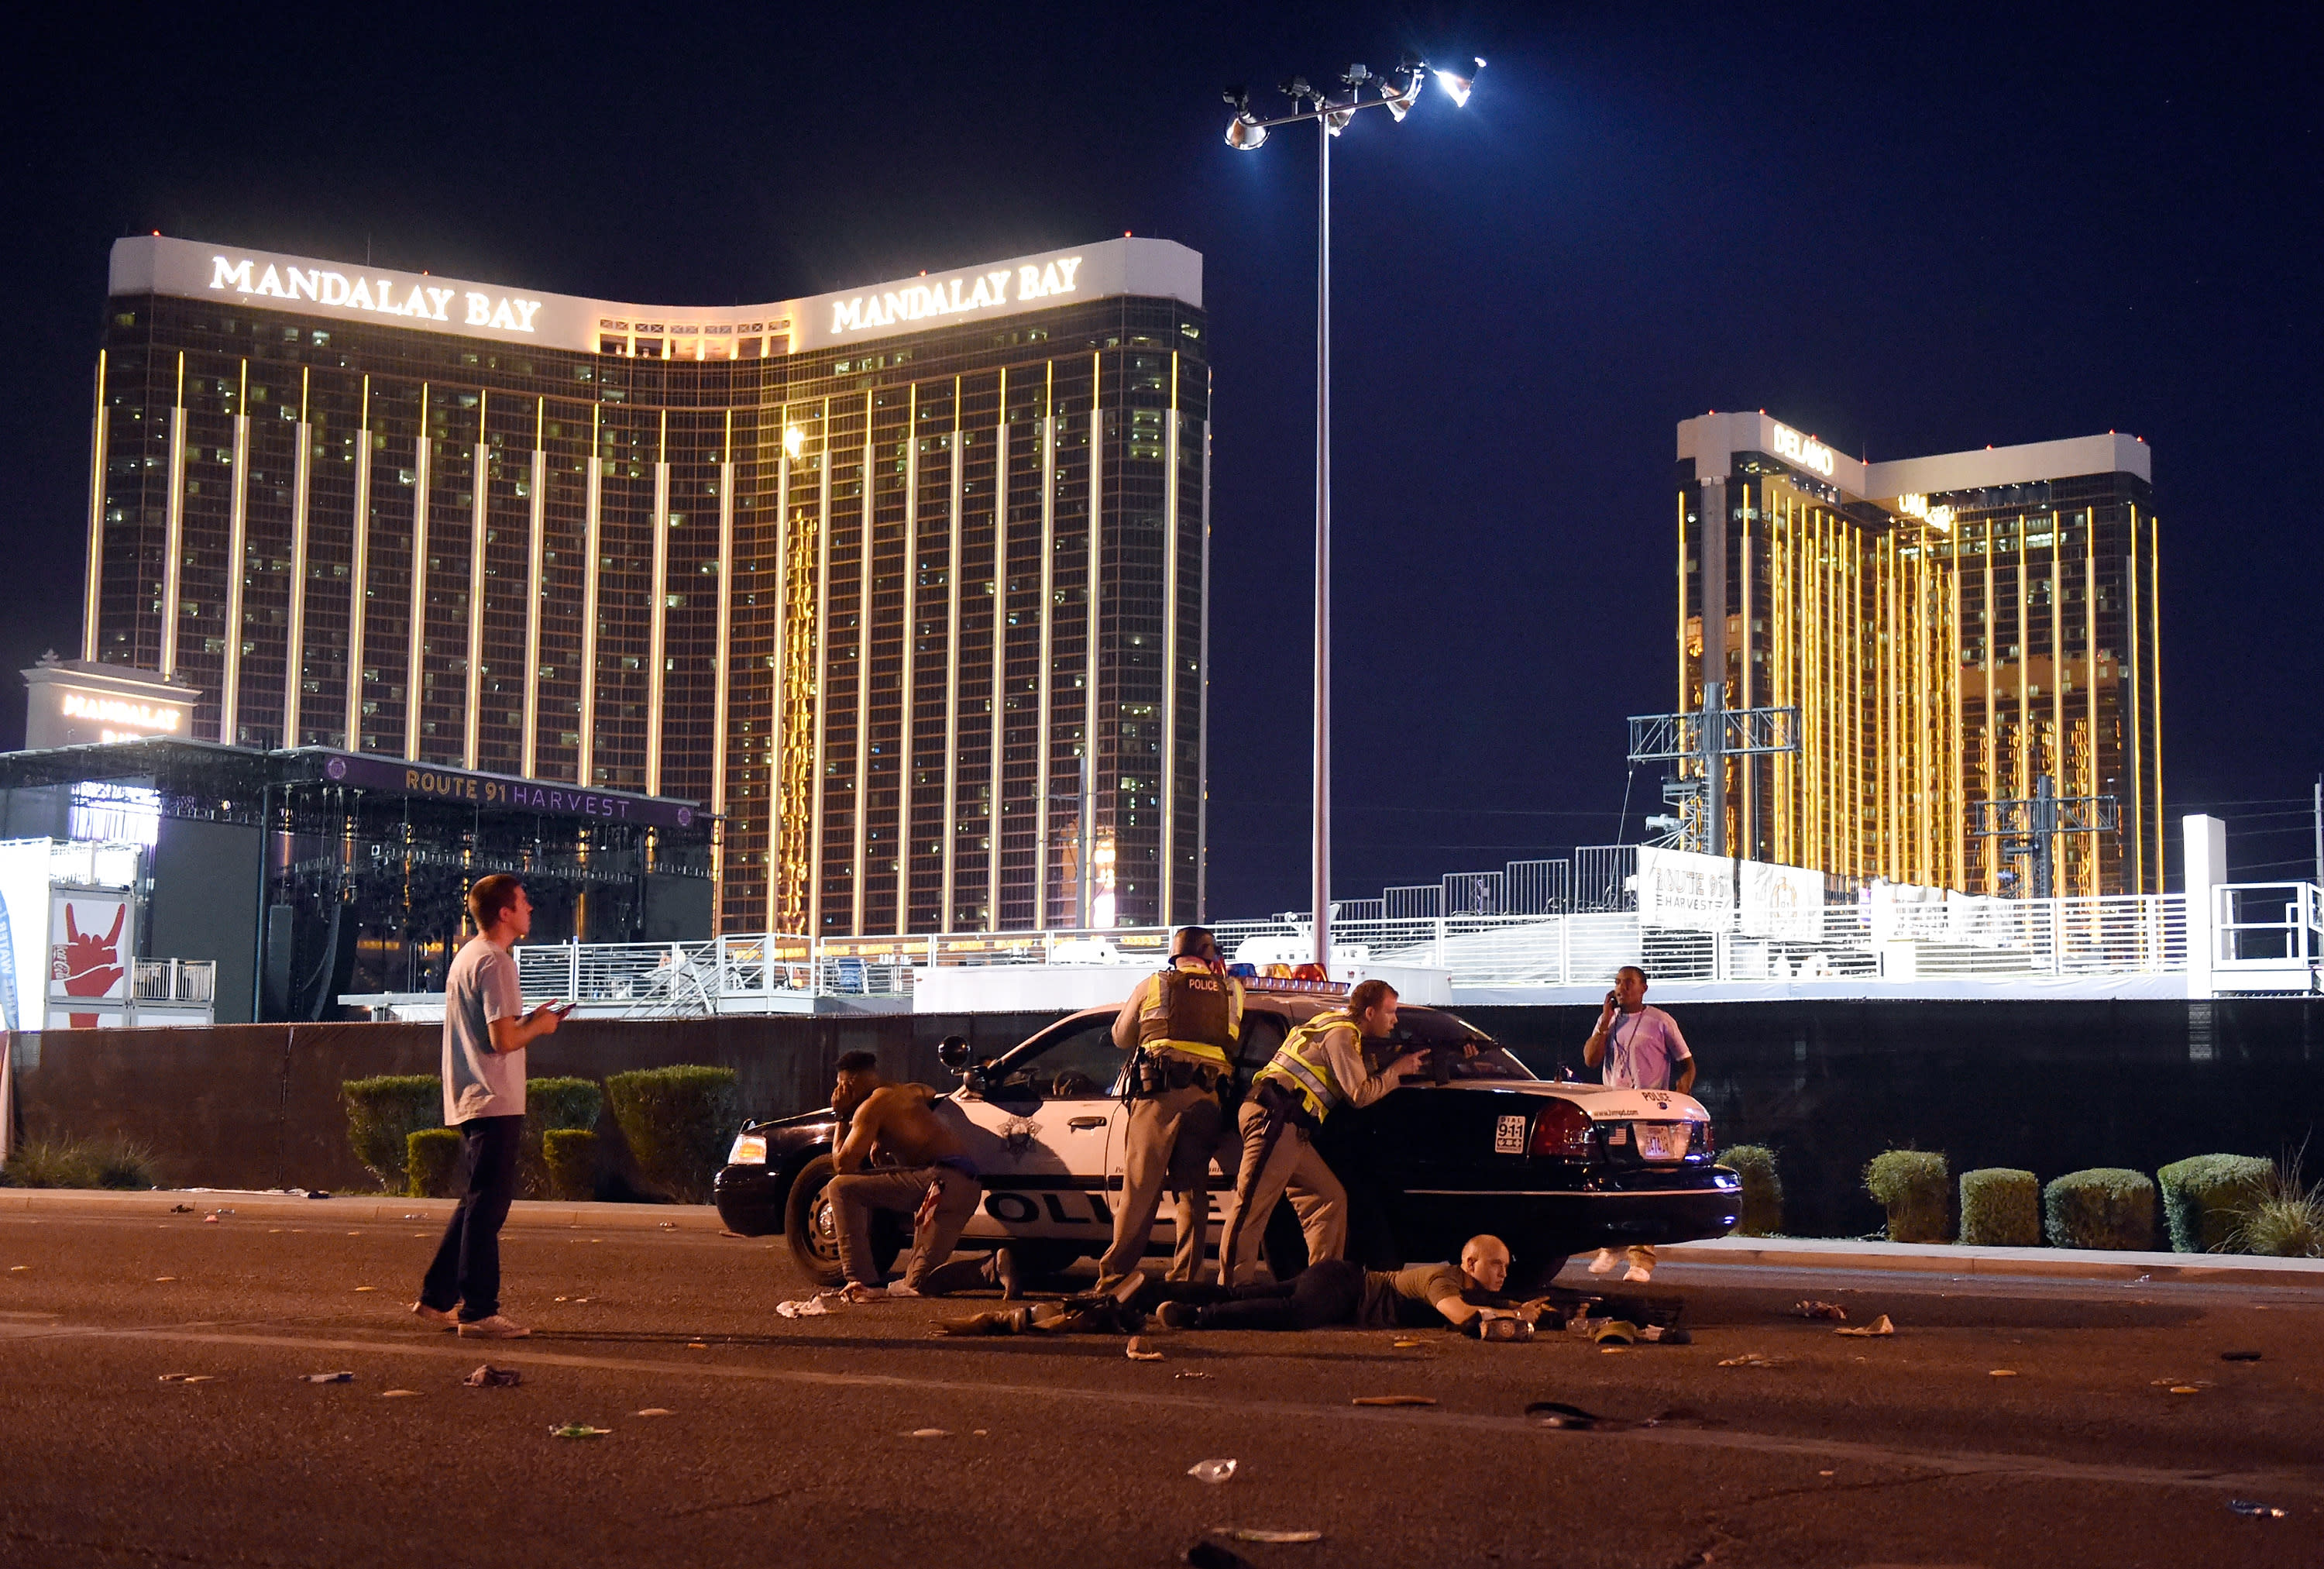 Las Vegas police stand guard along the streets of Las Vegas after a mass shooting (DAVID BECKER / GETTY IMAGES / AFP)